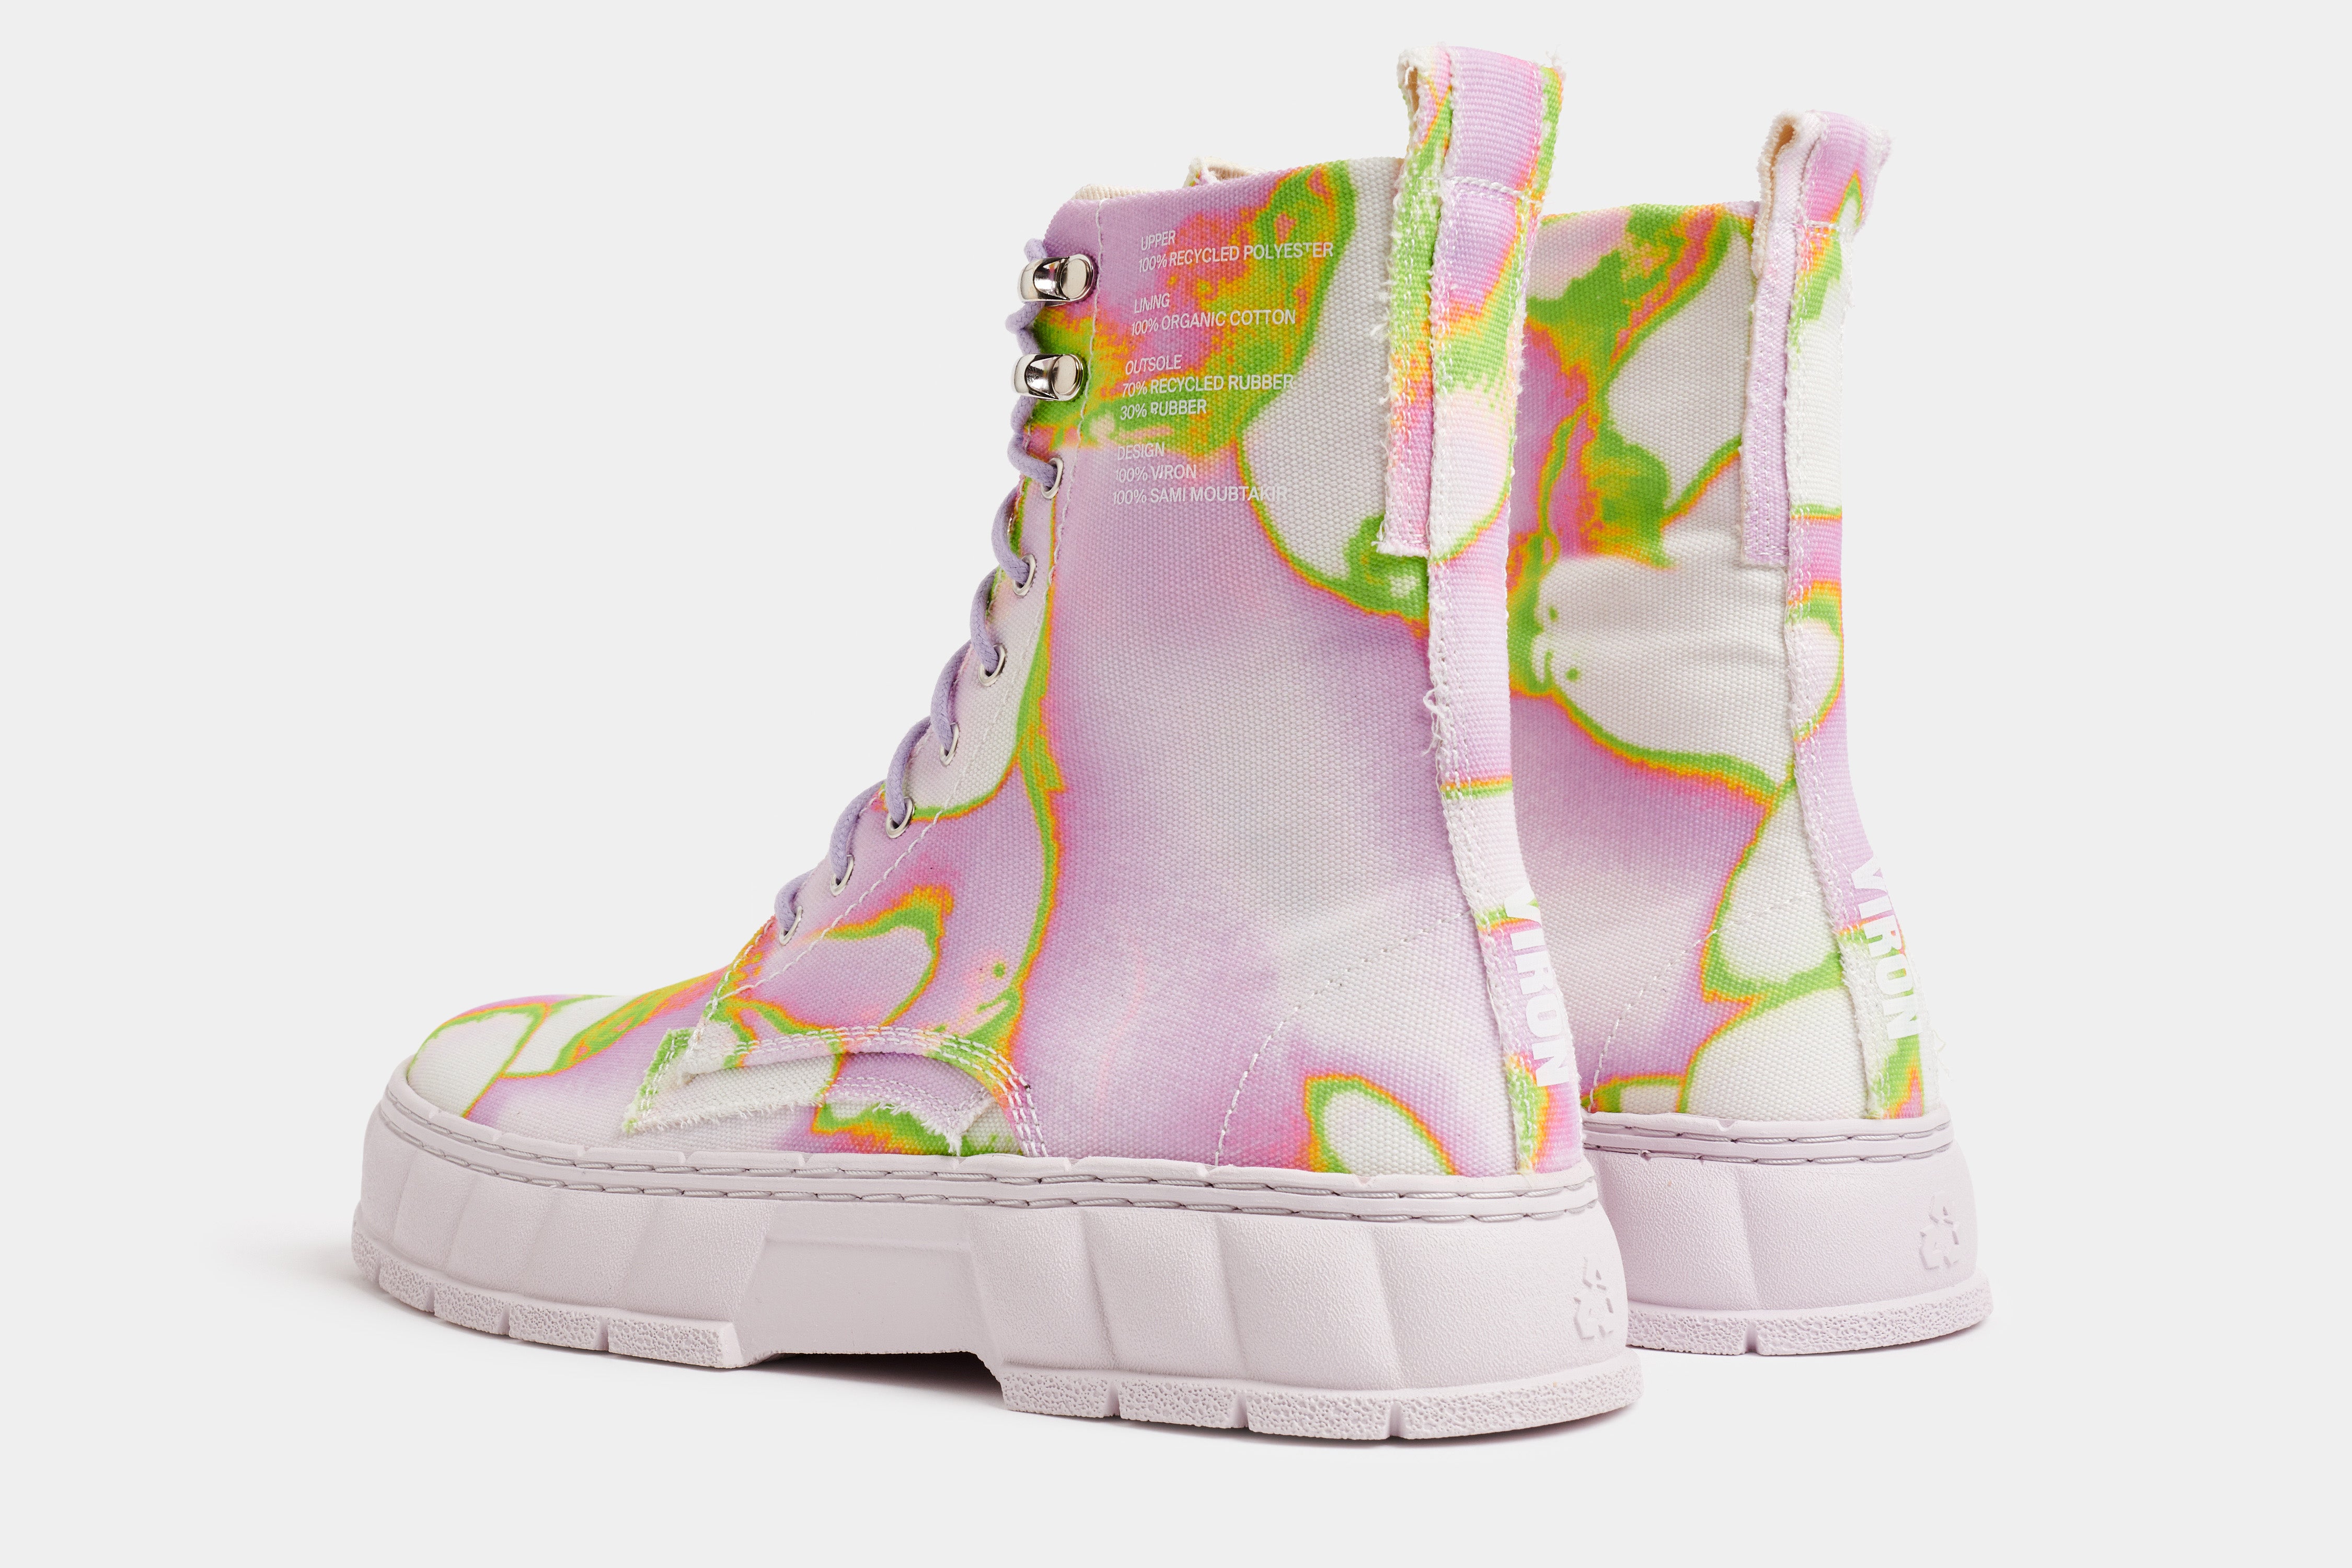 1992 Vegan combat boot made from recycled PET in pink and green shown from the back